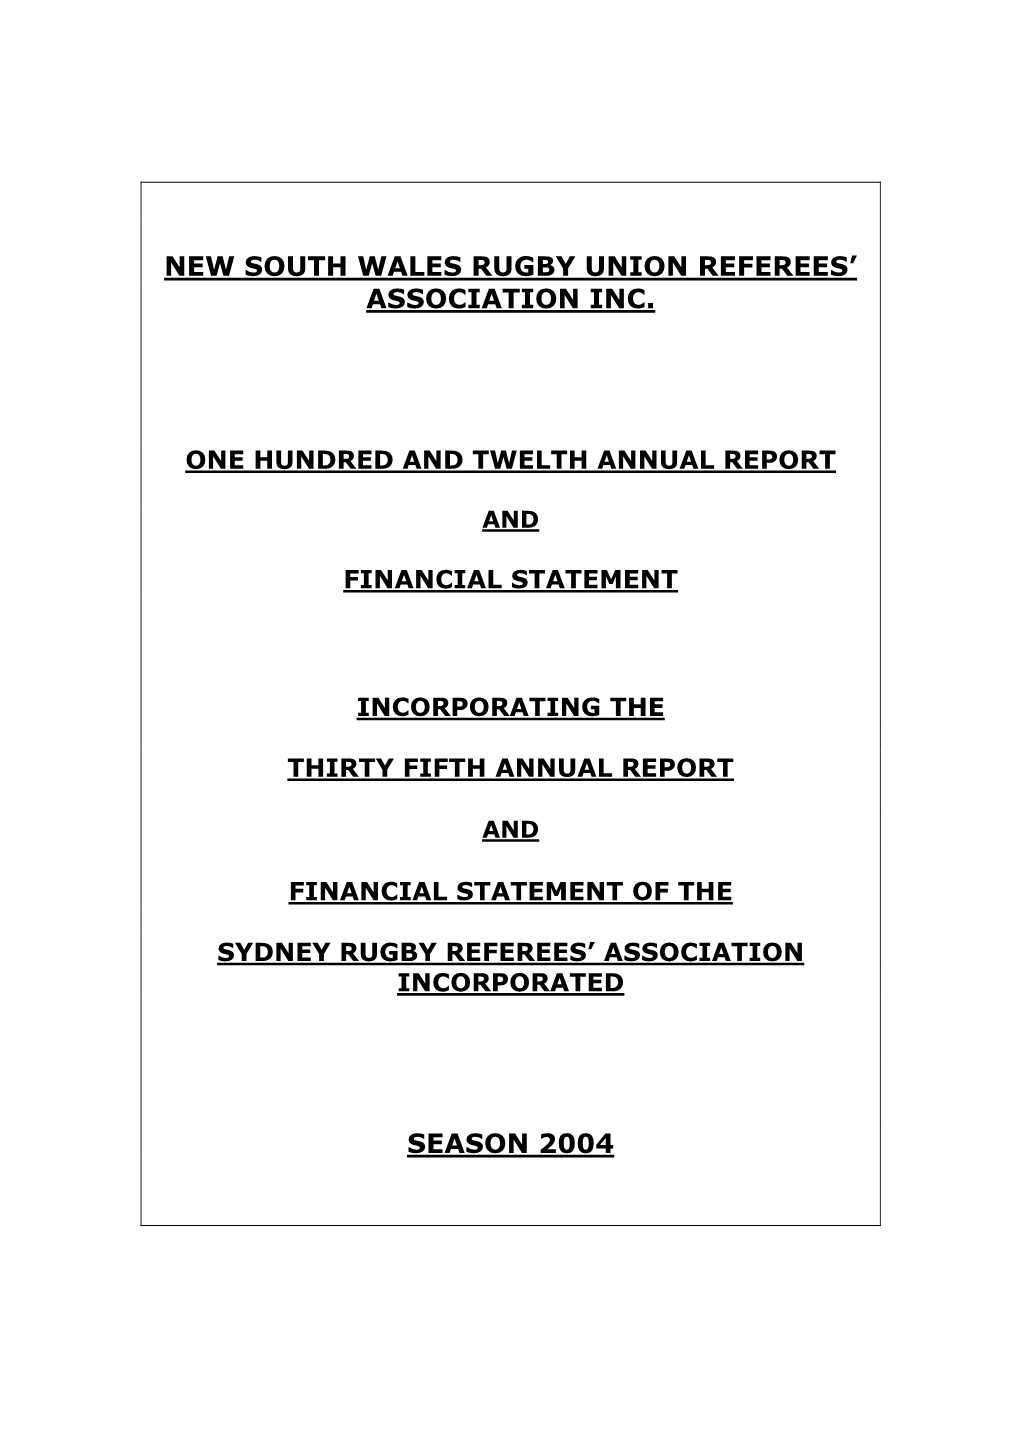 New South Wales Rugby Union Referees' Association Inc. Season 2004